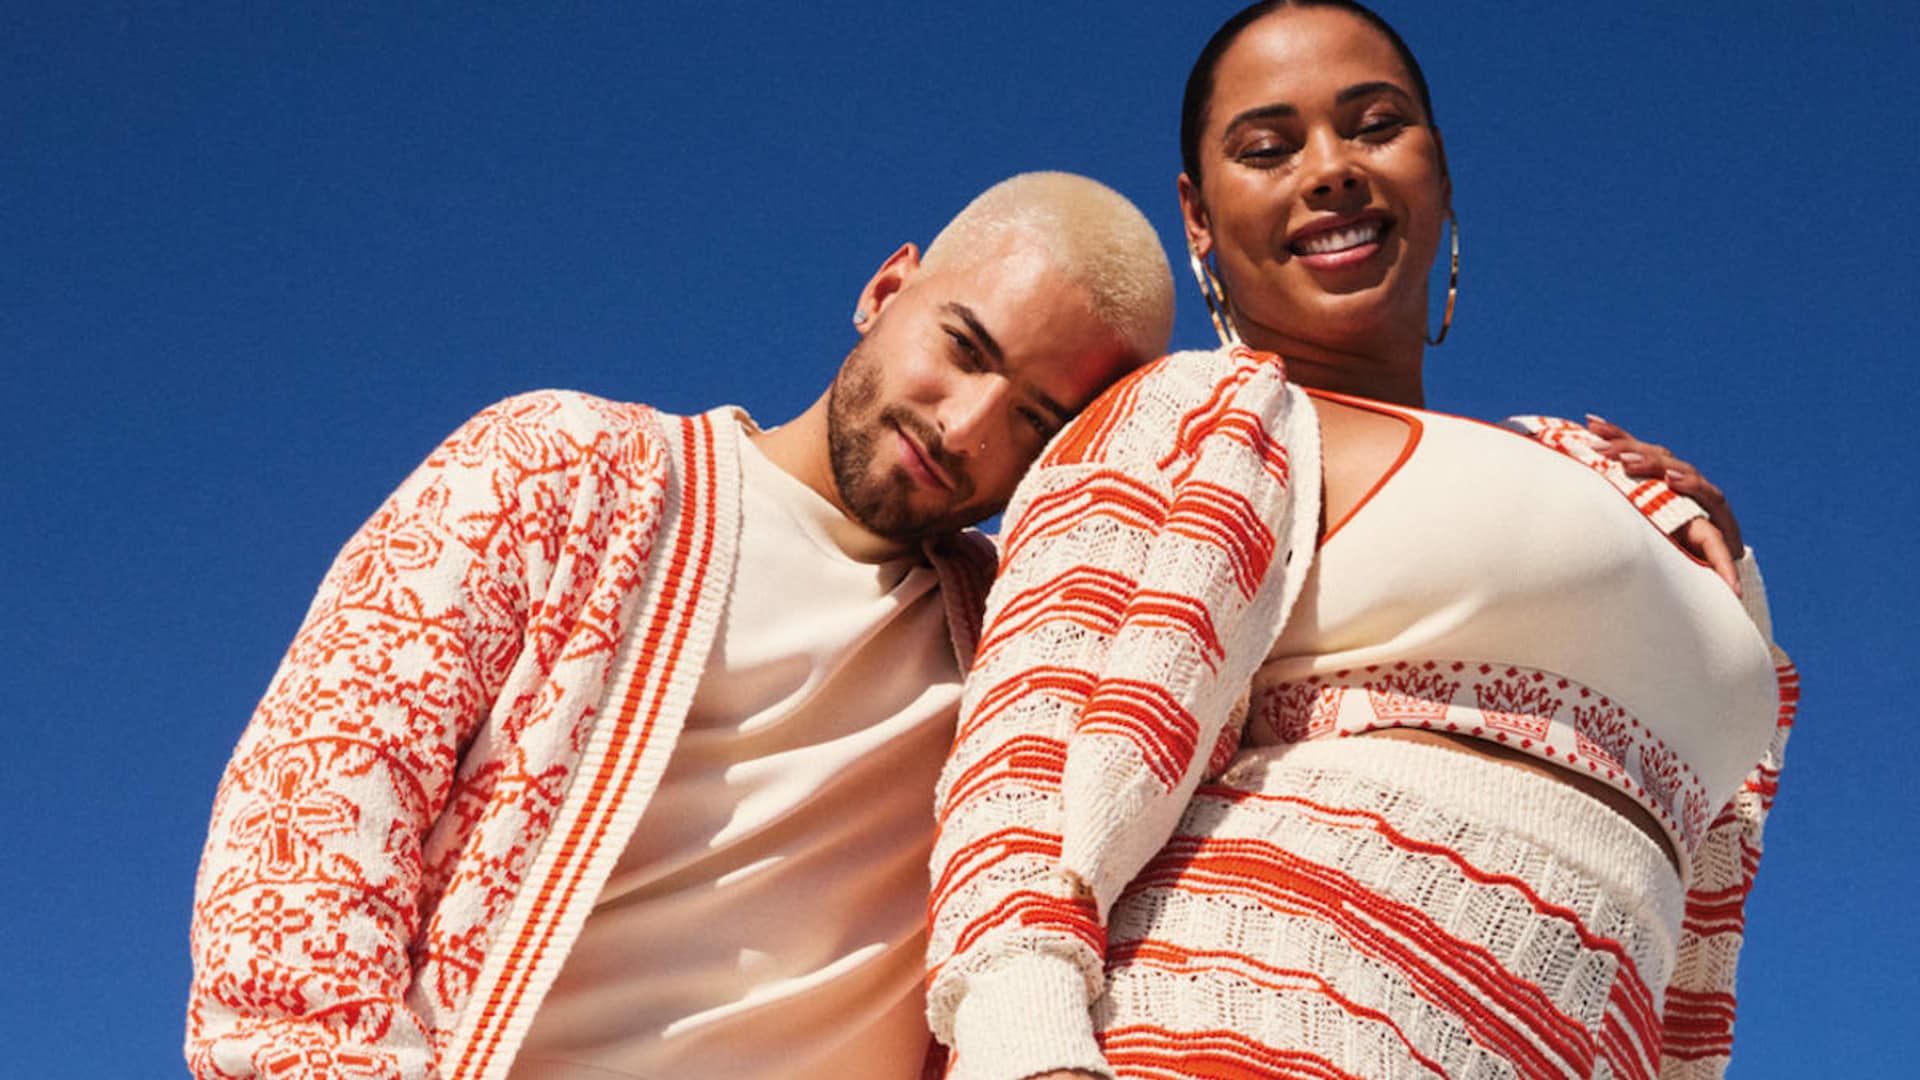 Maluma drops his first fashion collection at Macy's